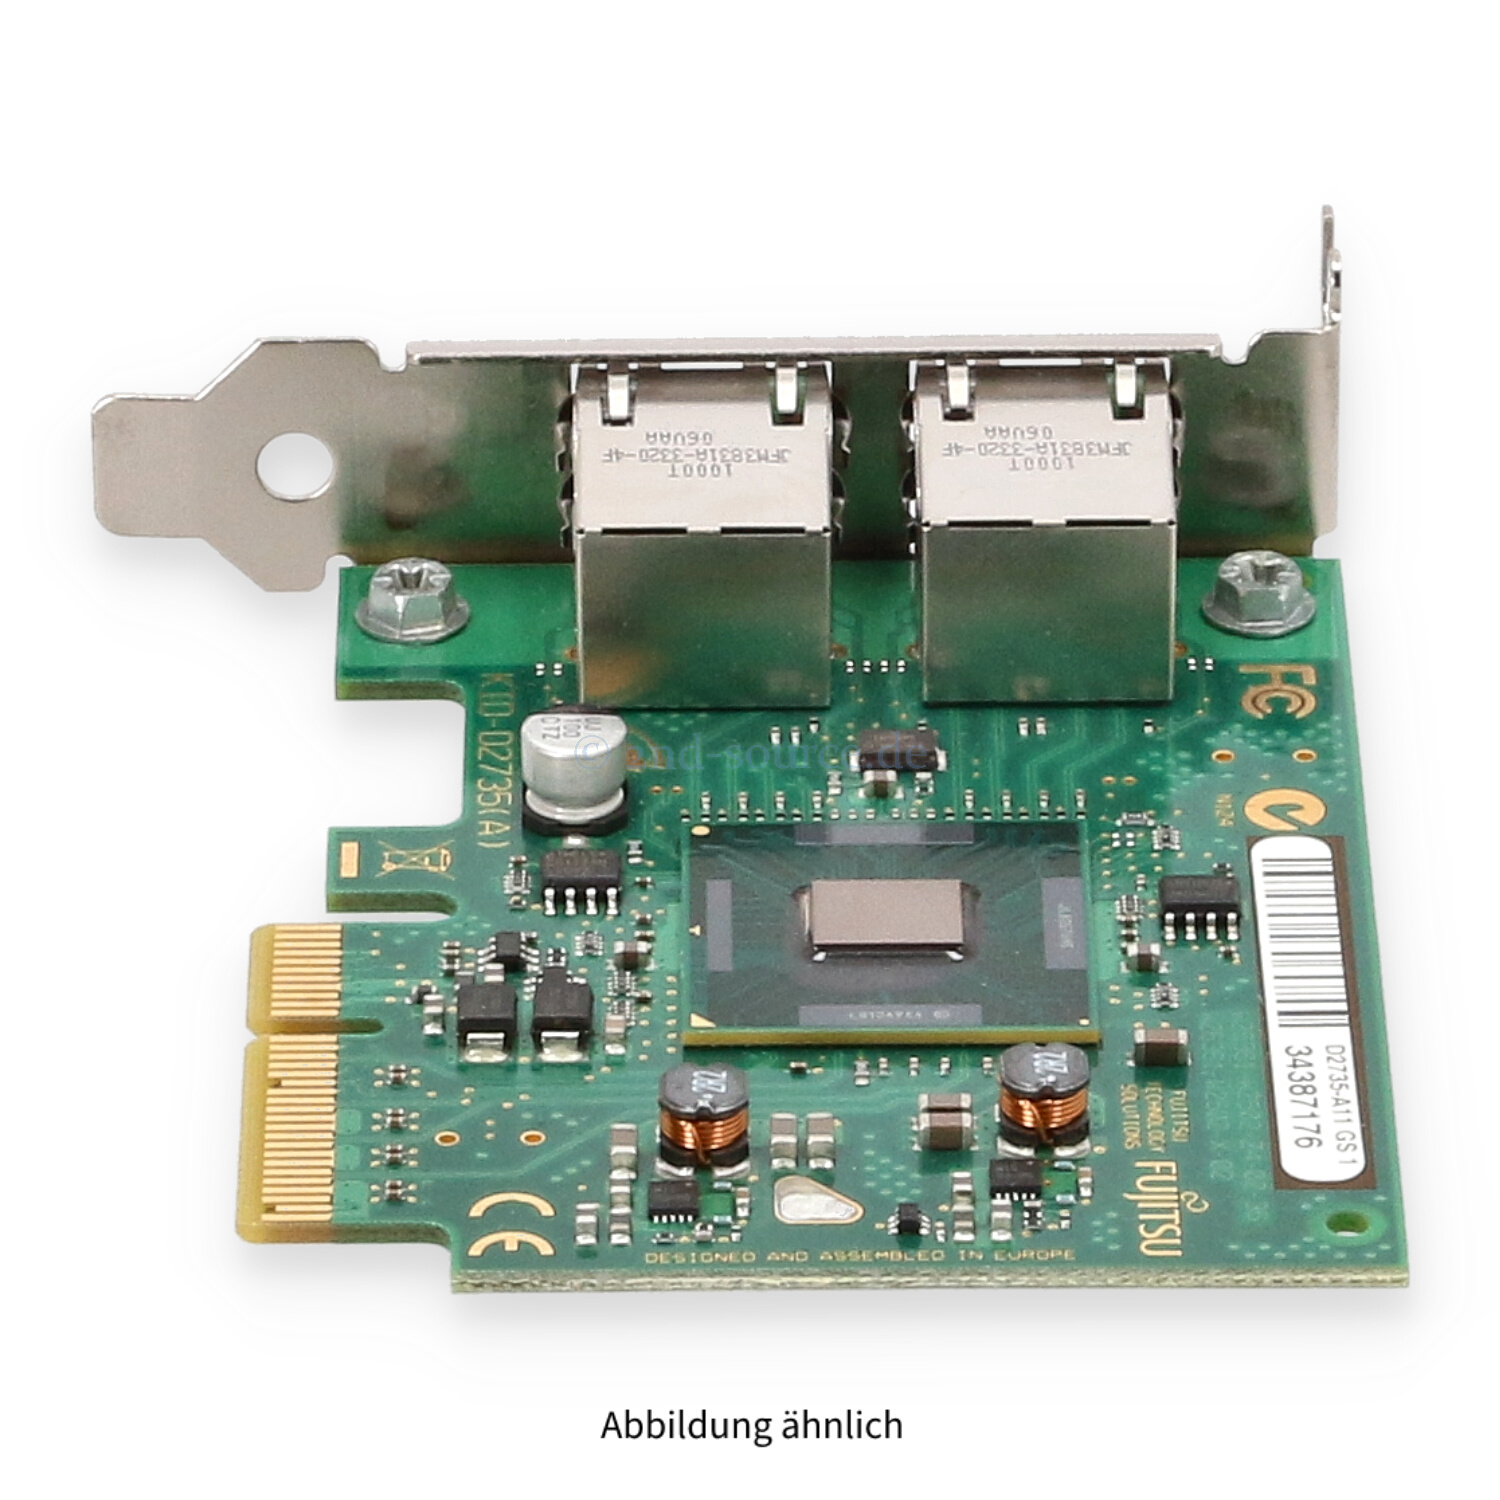 Fujitsu D2735-A12 2x1000Base-T PCIe Server Ethernet Adapter Low Profile S26361-D2735-A12